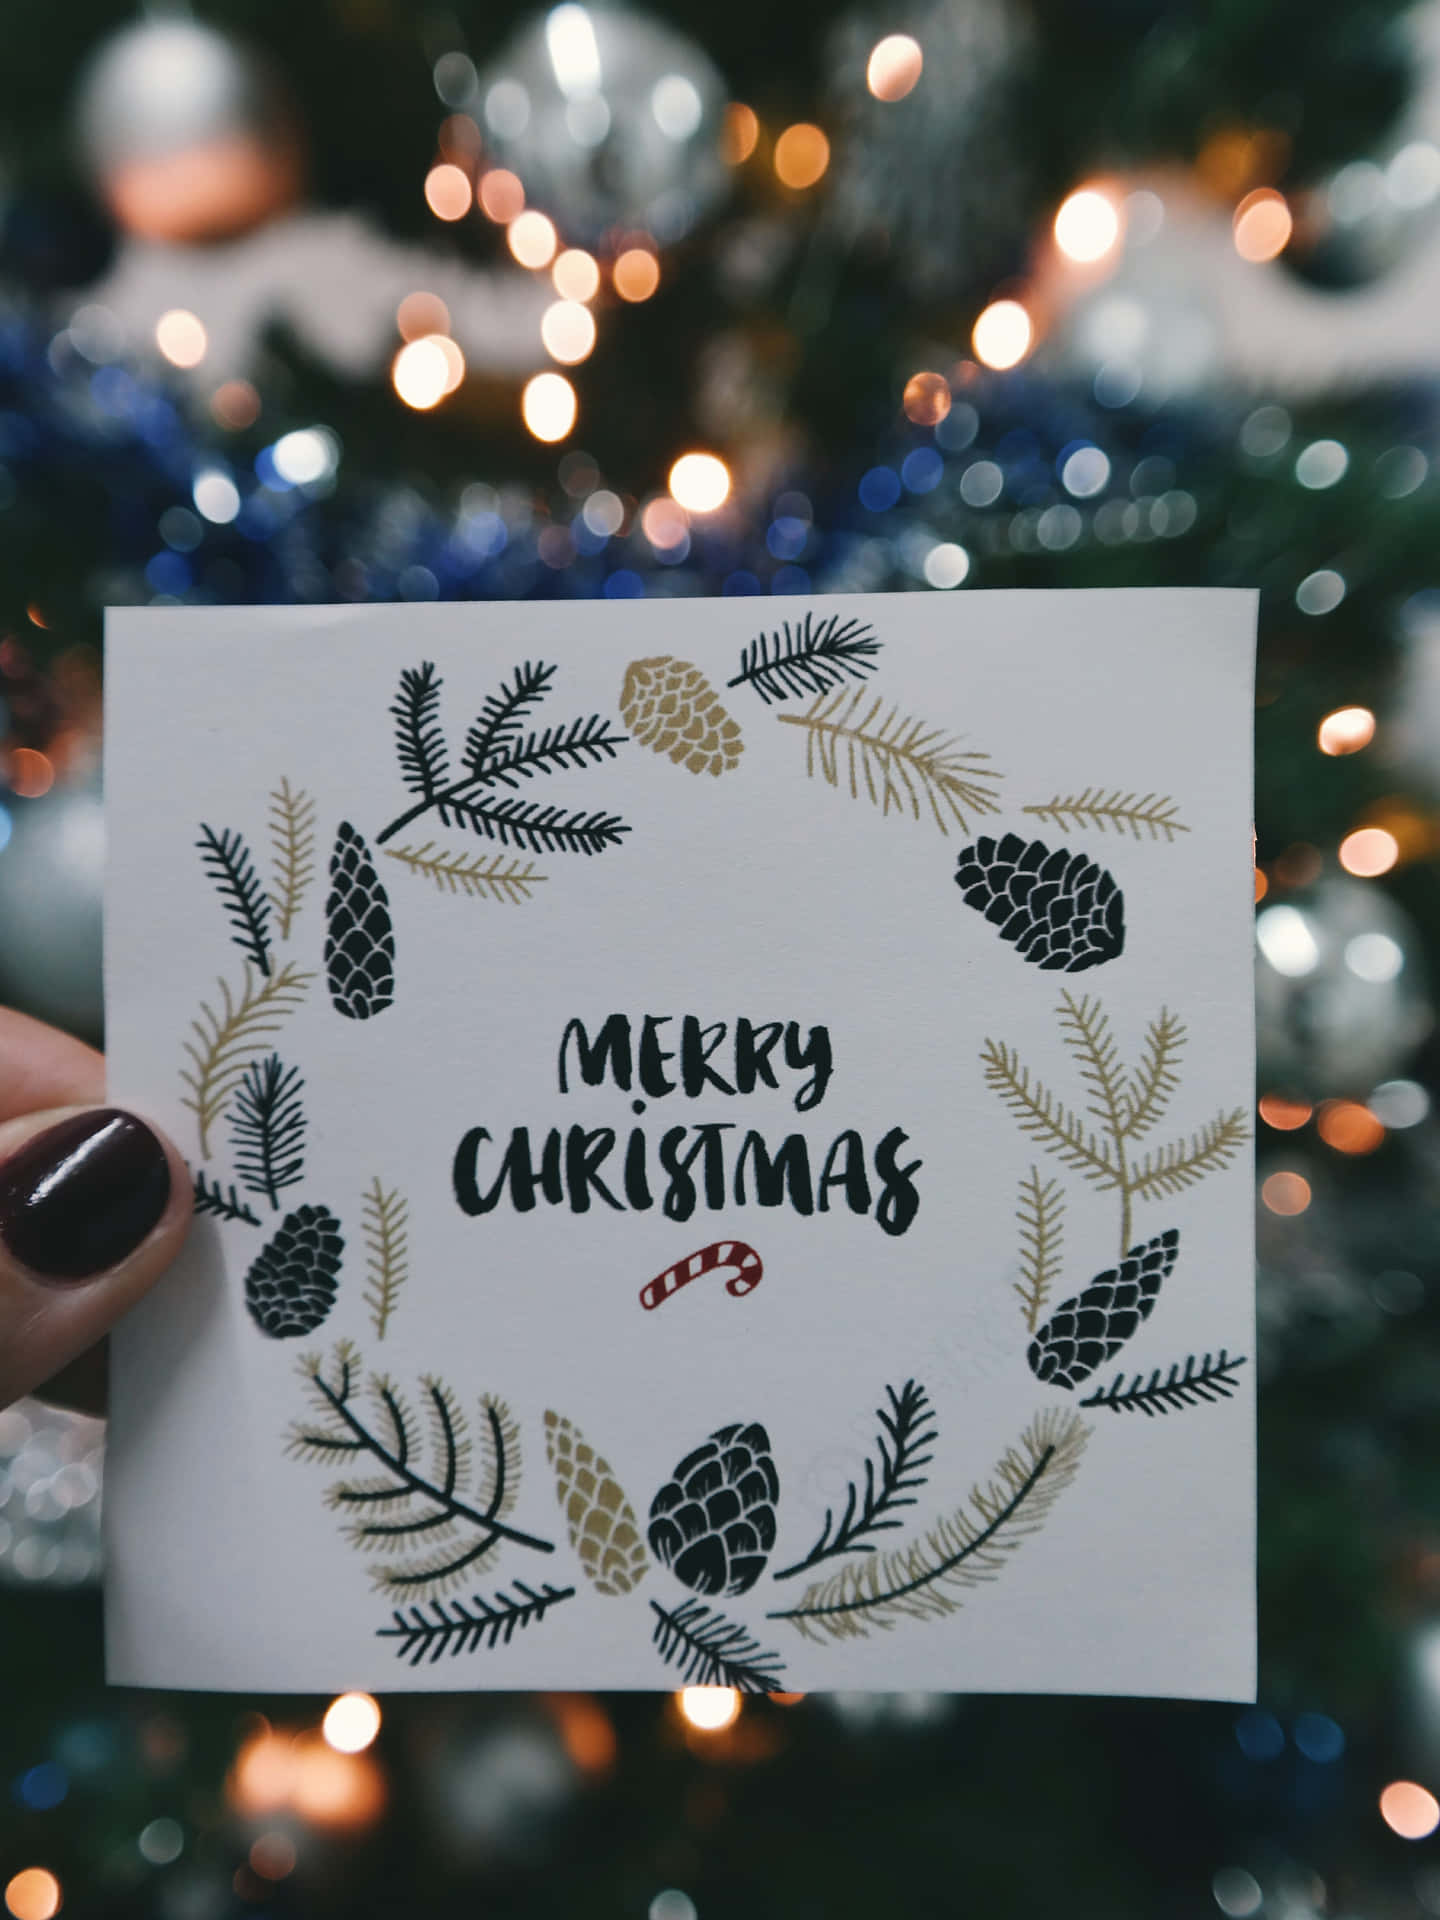 Spread some holiday cheer, send a Christmas card today!